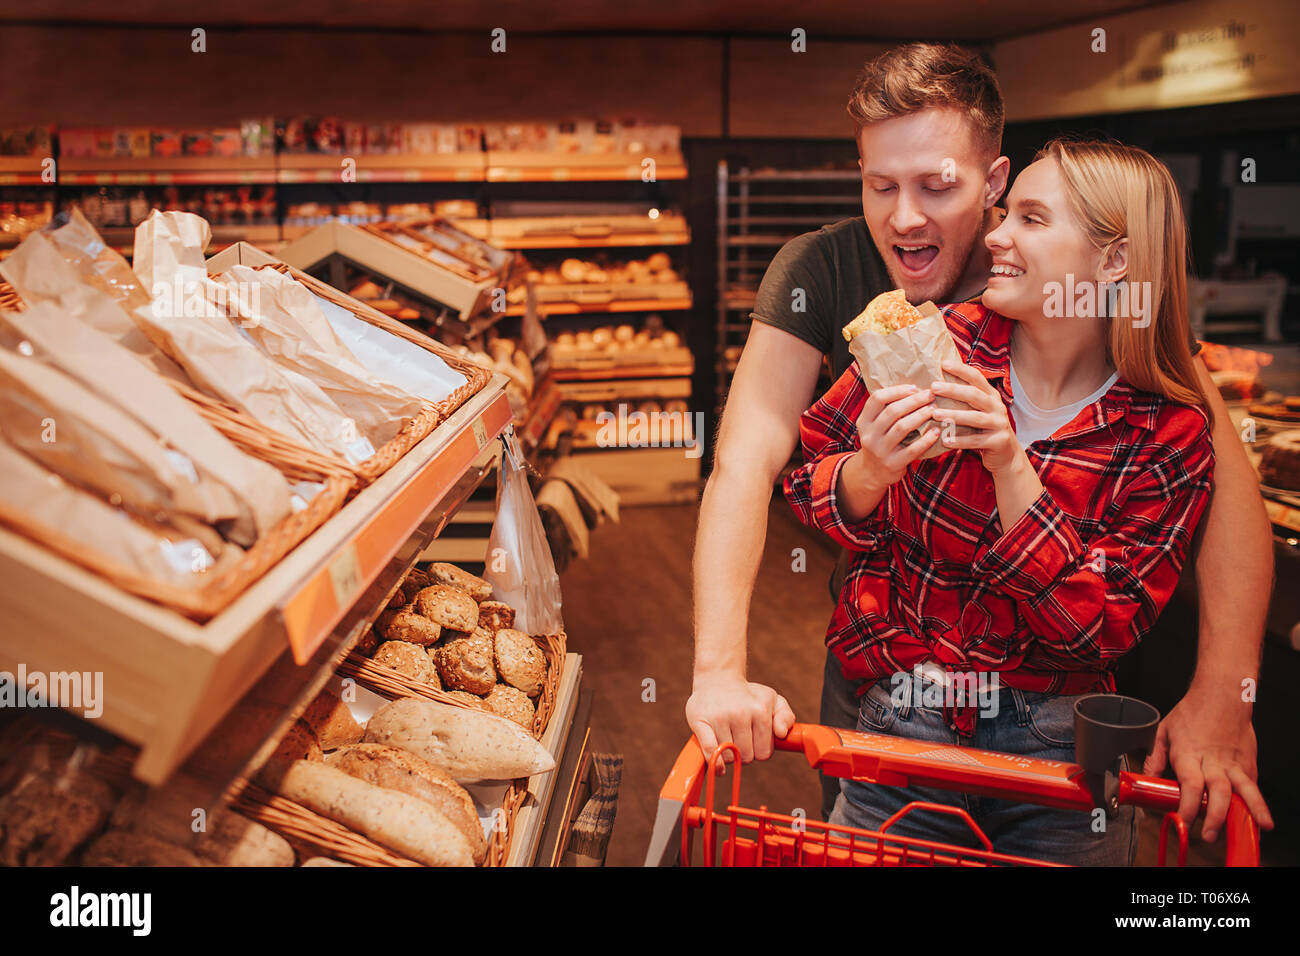 Young couple in grocery store. Funny man hold trolley with hands and want to bite roll. Woman hold it and smile. People stand at bread shelf. Stock Photo